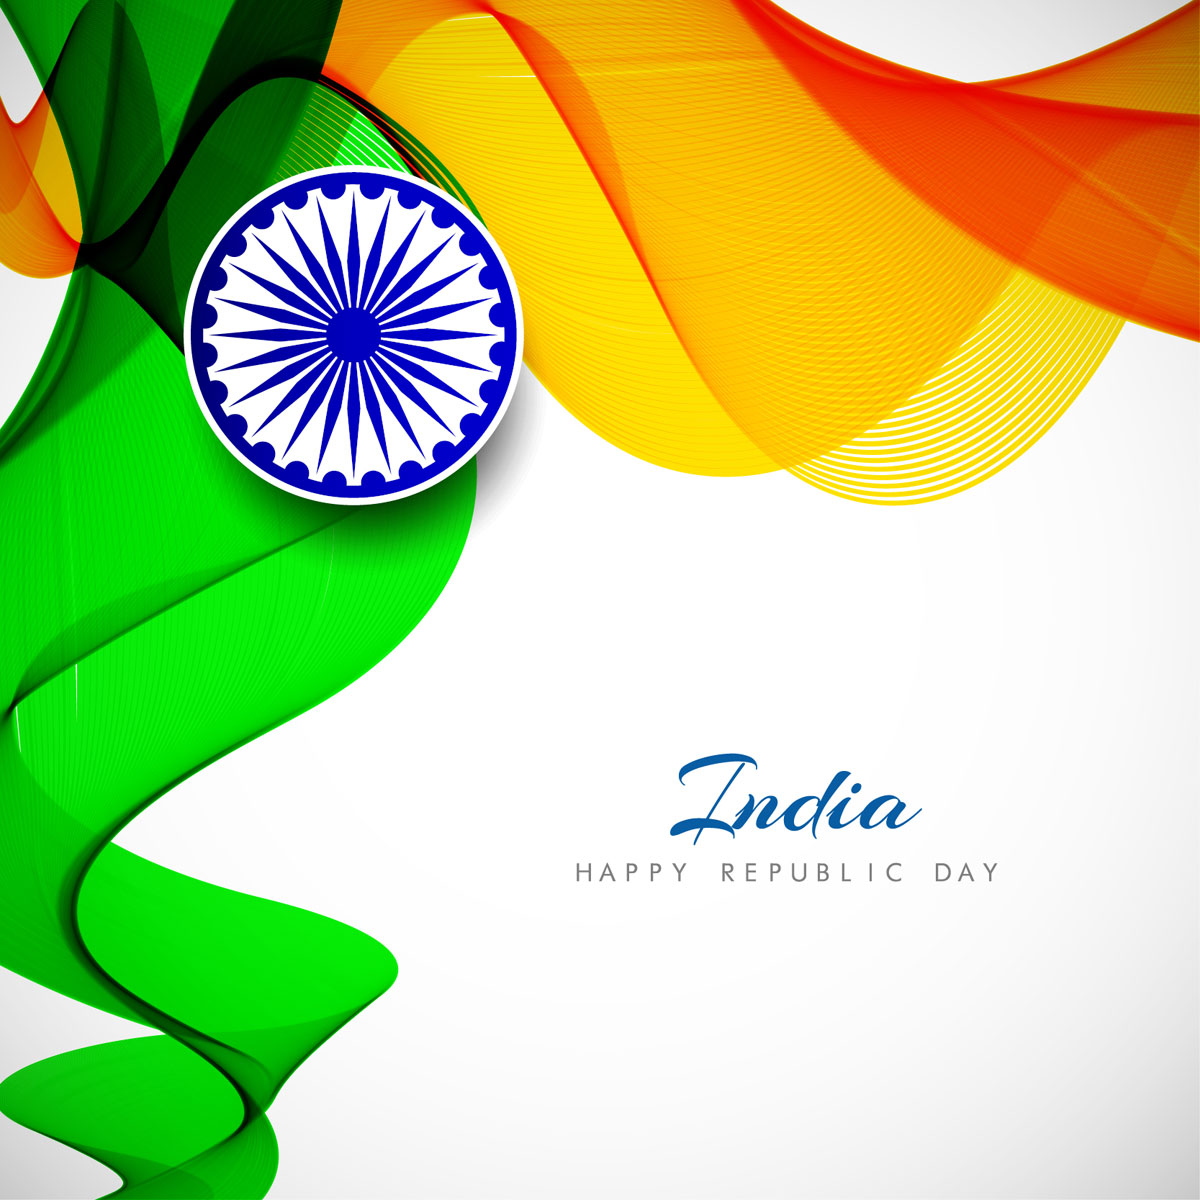 Republic Day Images Download Free - Happy Republic Day Background , HD Wallpaper & Backgrounds